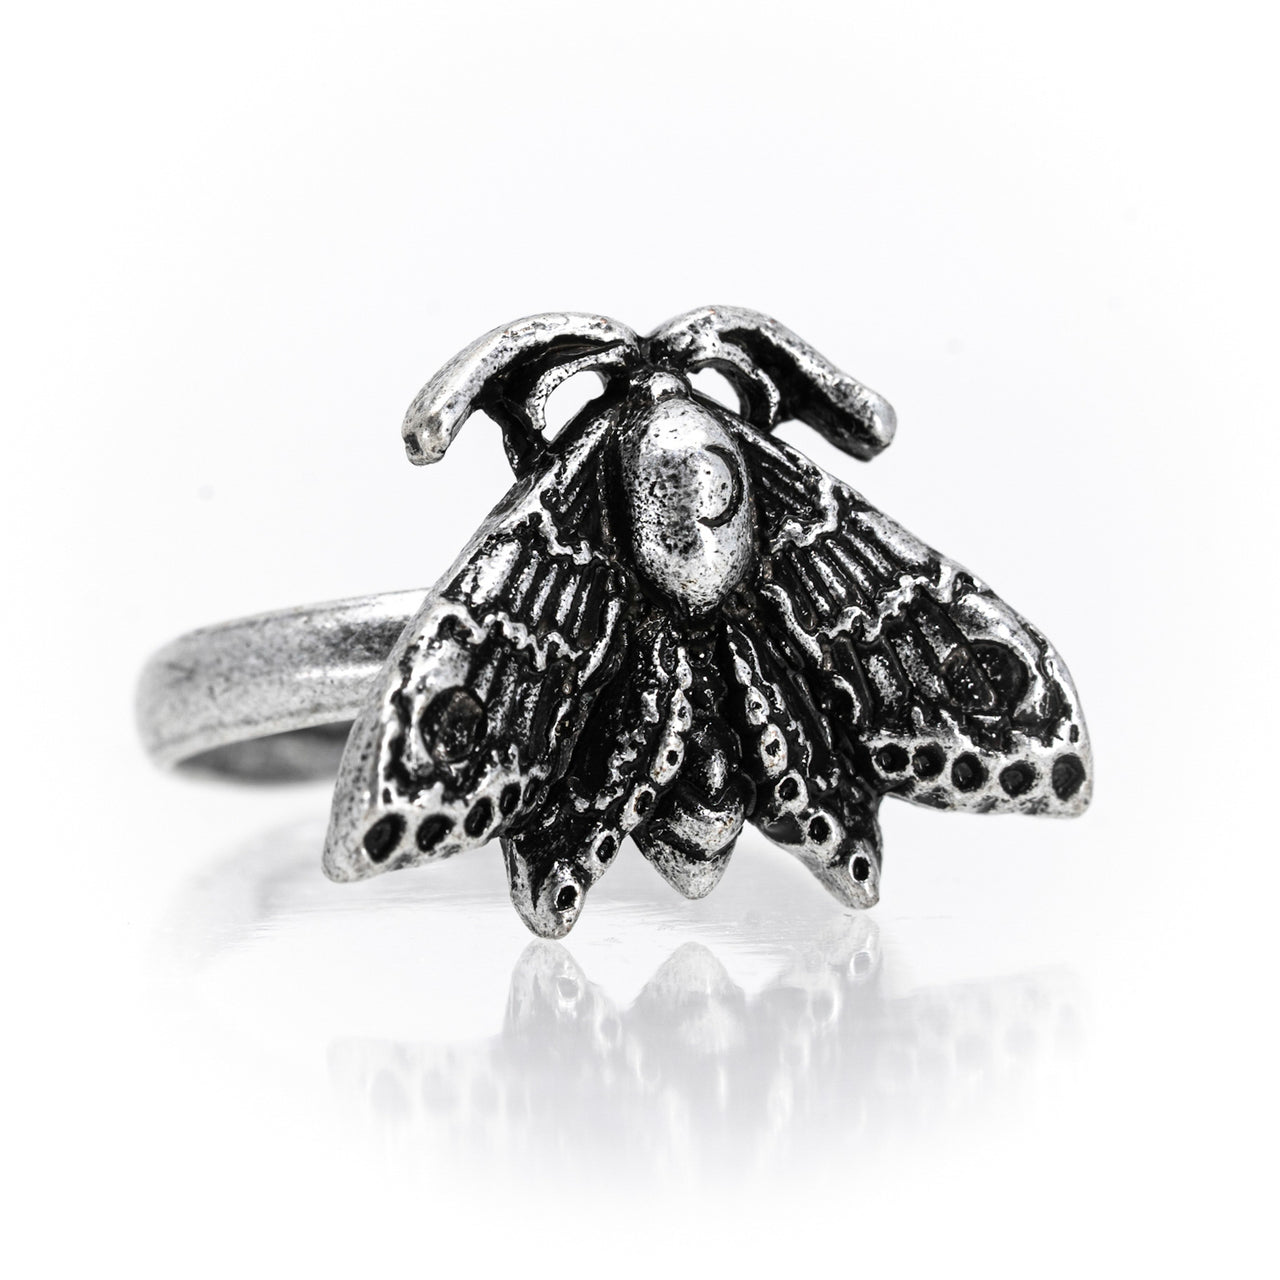 Chunky Moth Ring - Gothic Witchy Ring - Black Feather Design